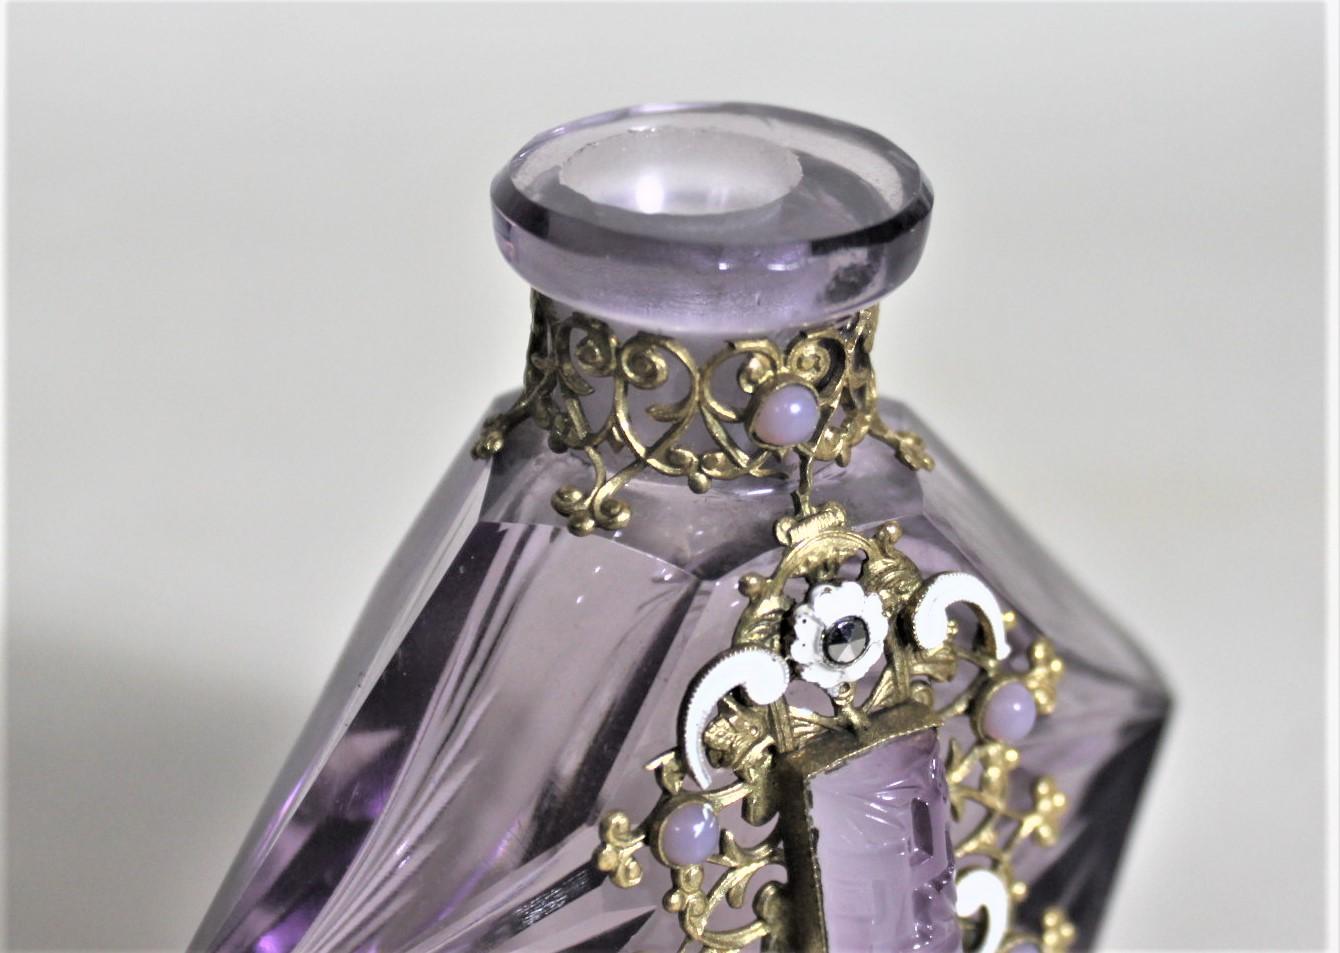 Metal Art Deco Czech Cut Crystal Perfume Bottle with Applied Filigree and Inlaid Glass For Sale